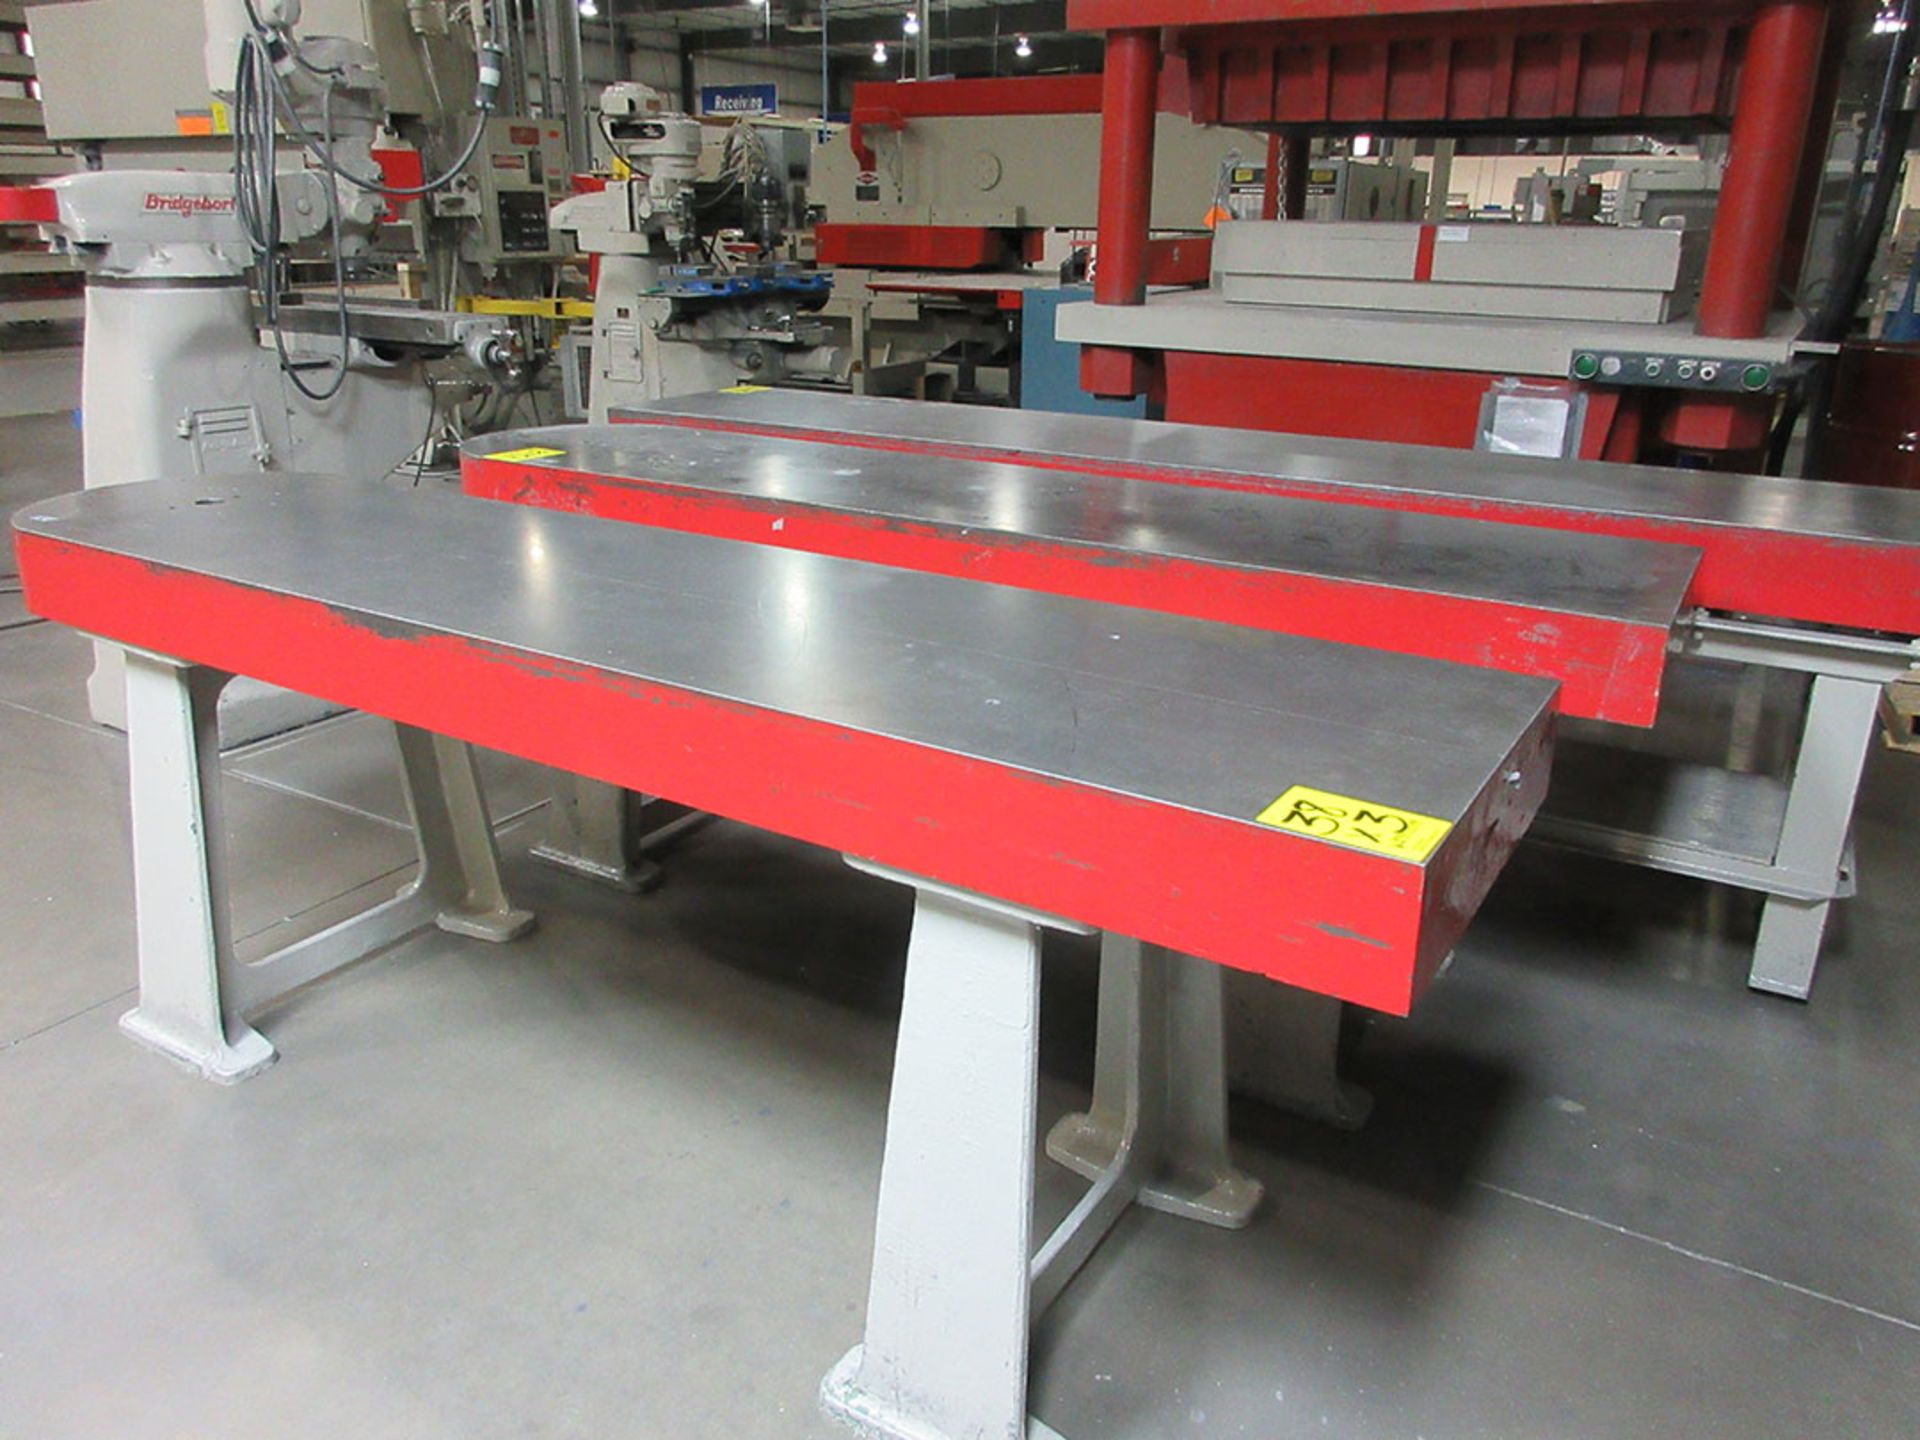 (2) 102'' X 24'' X 1 1/2'' THICKNESS STEEL LAYOUT TABLE & (1) 120'' X 24'' X 1 1/2'' THICKNESS